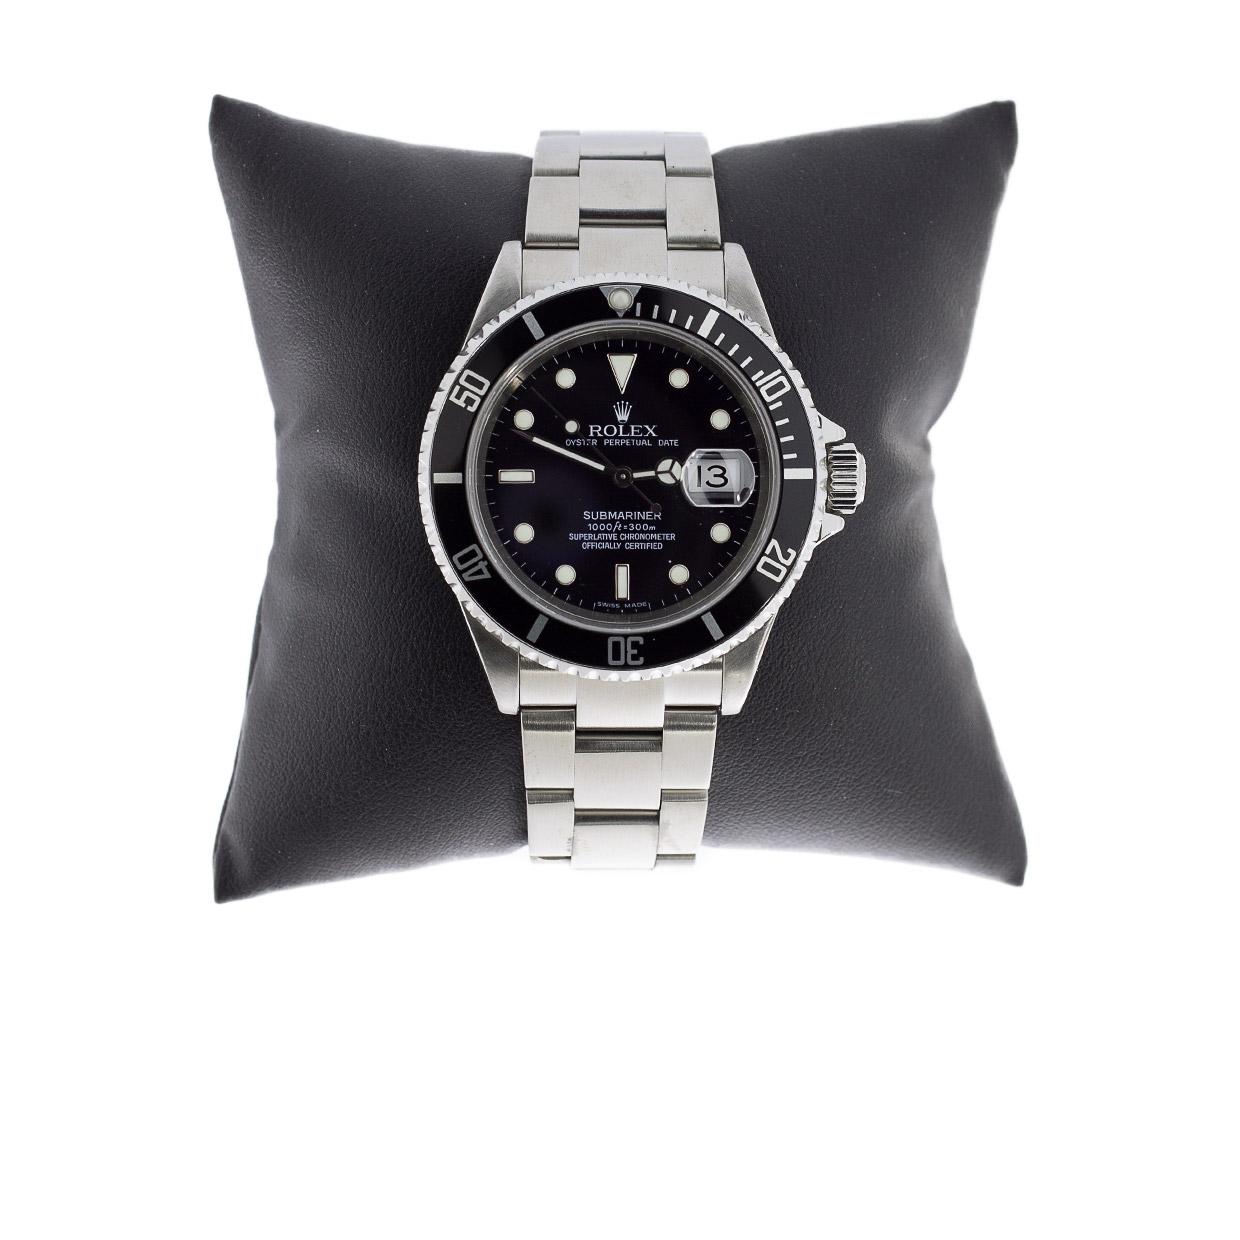 Product Details:
Condition: Pre Owned
Brand: Rolex
Collection: Submariner
Case Material: Stainless Steel
Gender: Mens
MPN: 16610
Movement: Mechanical Automatic
Face Color: Black
Band Type: Bracelet
Case Size: 40
Style: Diver
Cert/Paperwork: Box &